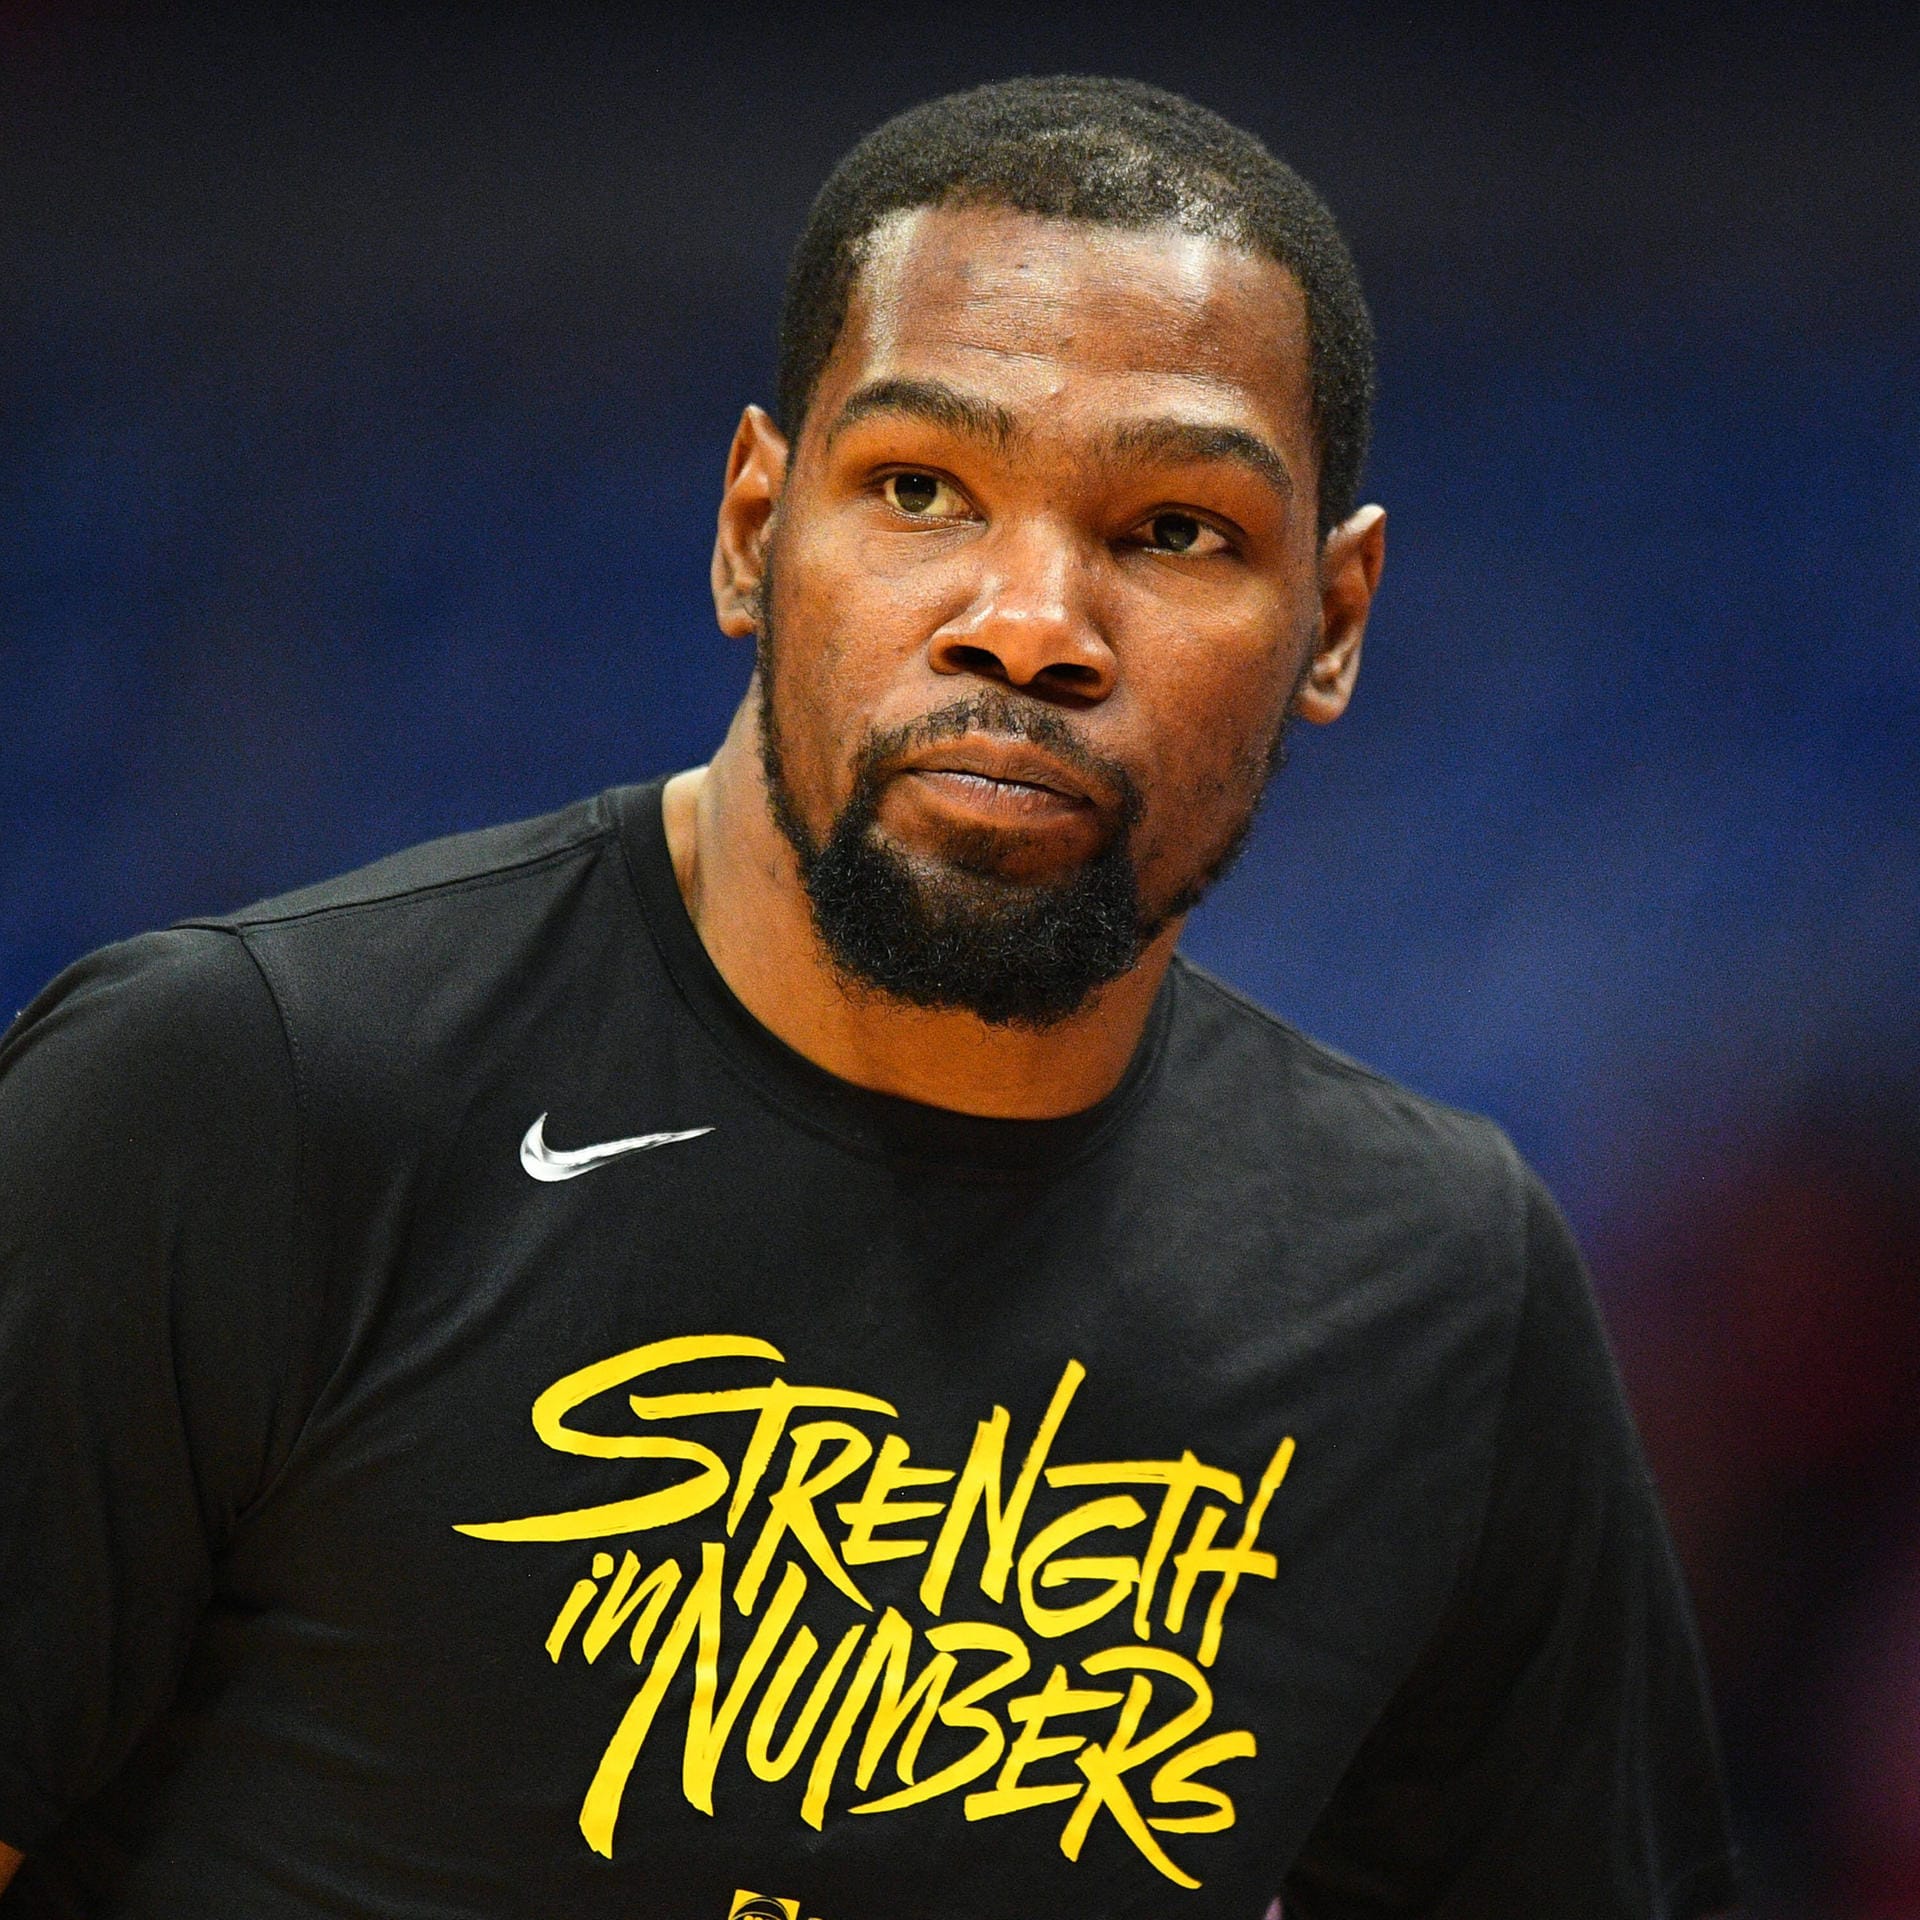 March 17, 2020, NBA, Basketball Herren, USA star Kevin Durant, of the Brooklyn Nets, has reportedly tested positive for